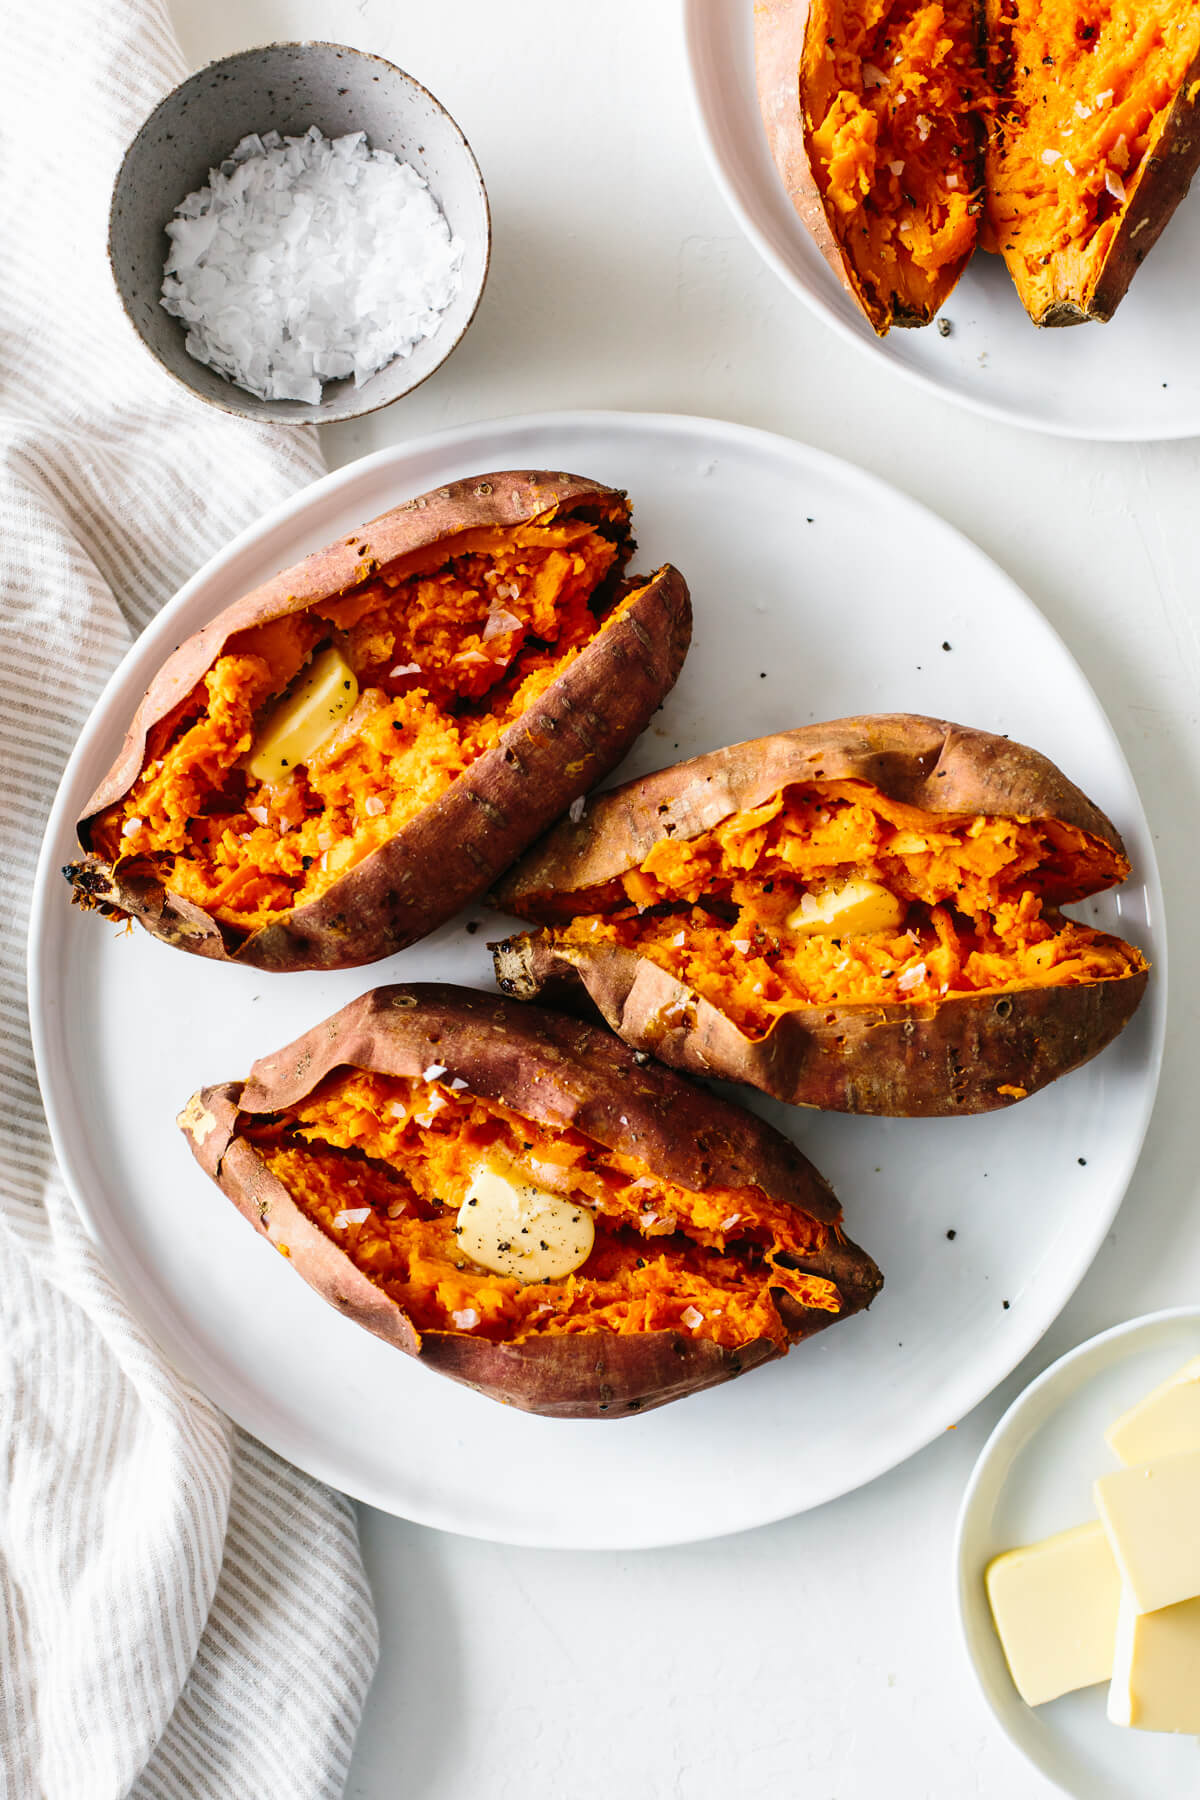 A plate of baked sweet potatoes